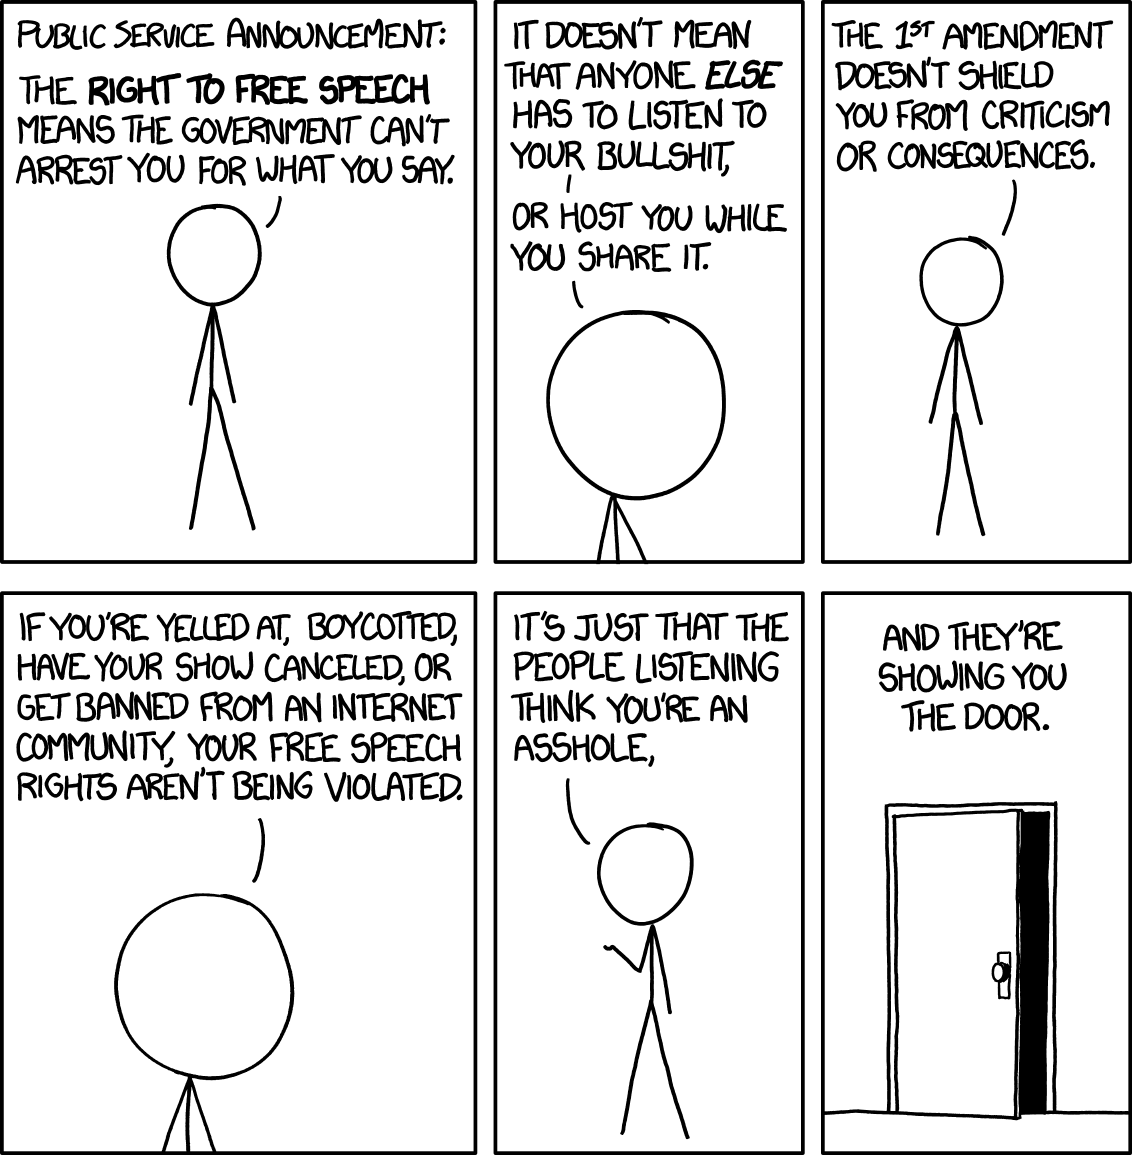 - if you are so wildly ignorant of Nazi Germany that you think this comes close to that regime, I recommend doing some basic reading. Perhaps follow  @AuschwitzMuseum- this XKCD comic